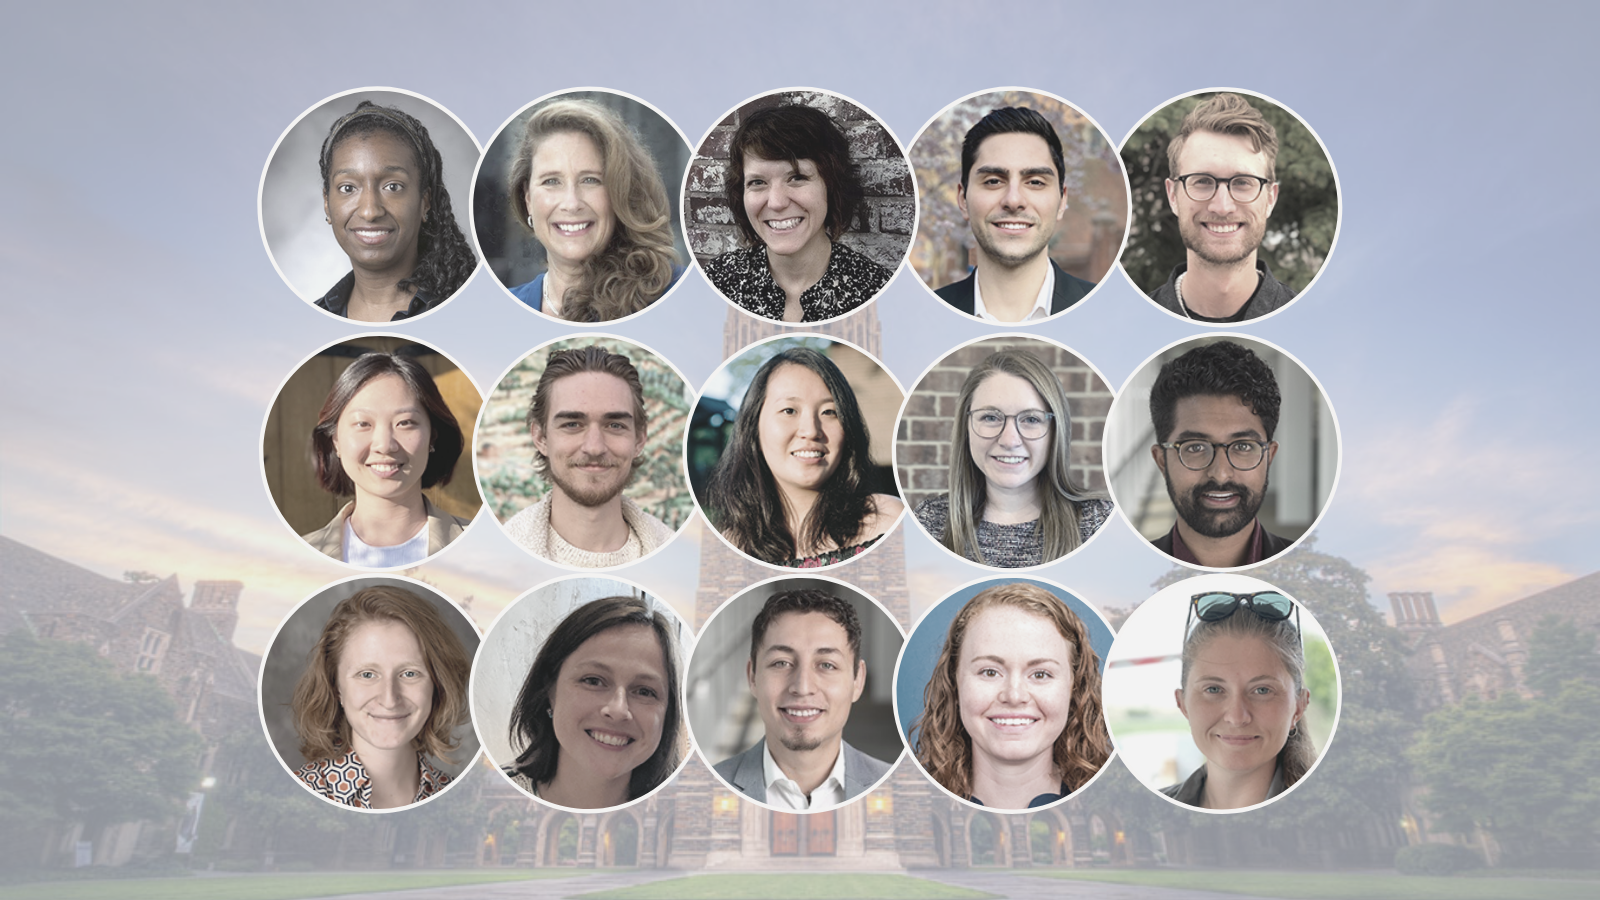 Portraits of 15 people on background of Duke campus.